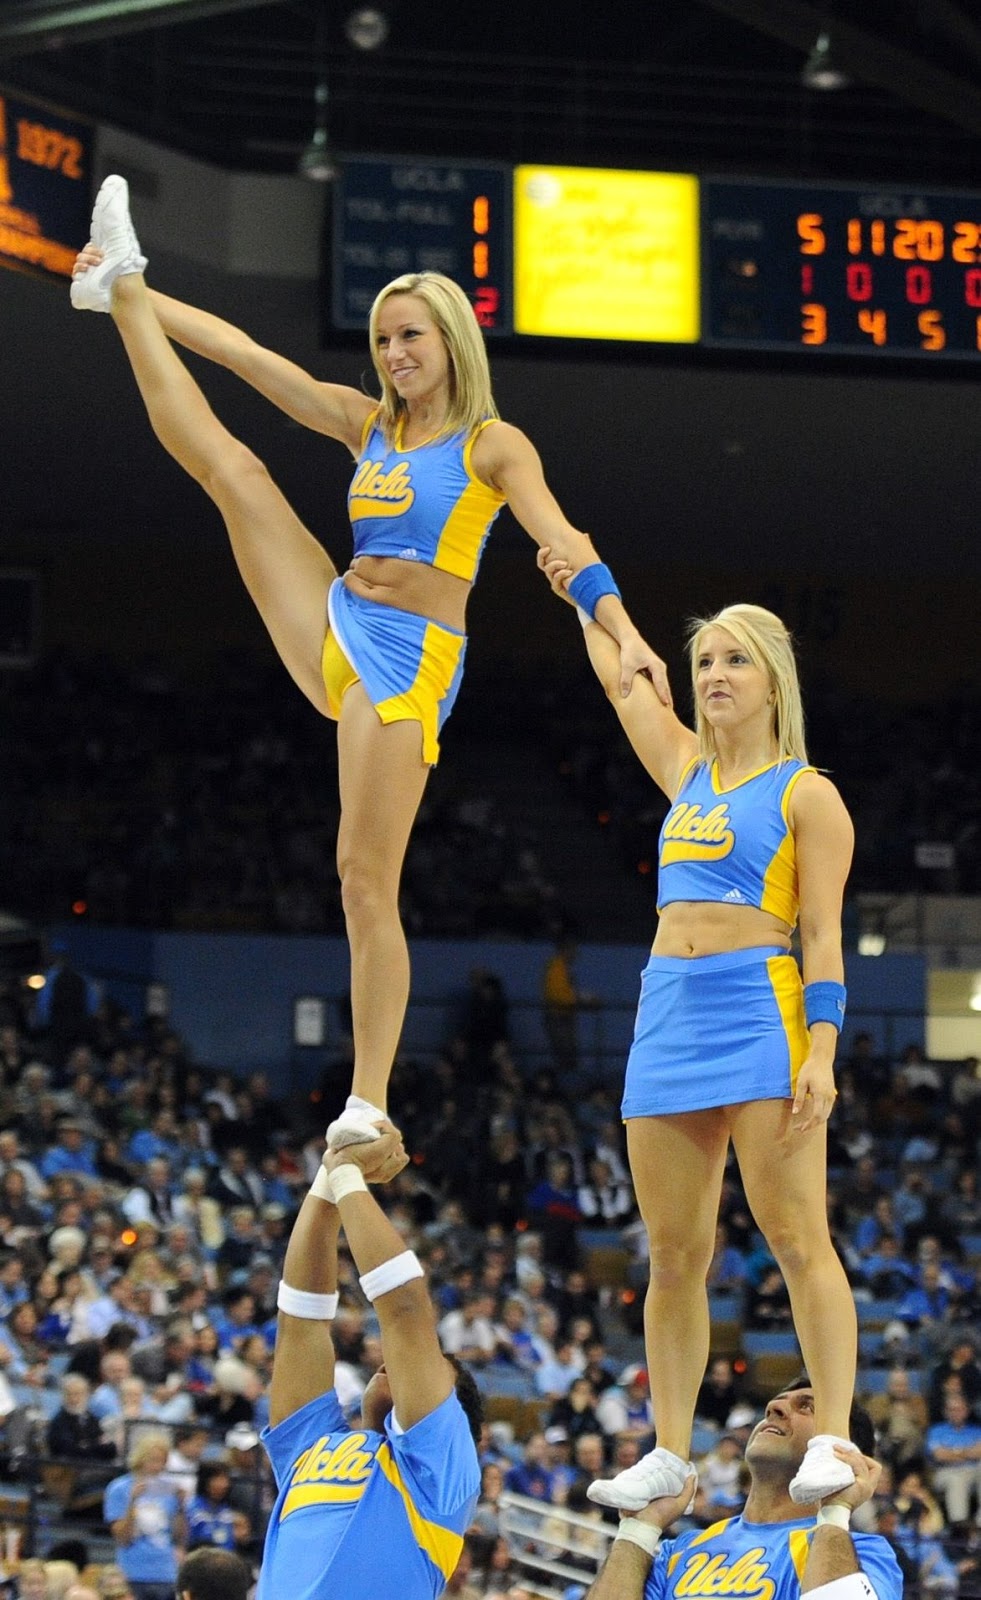 Herald recomended cheerleading upskirt pictures Memphis